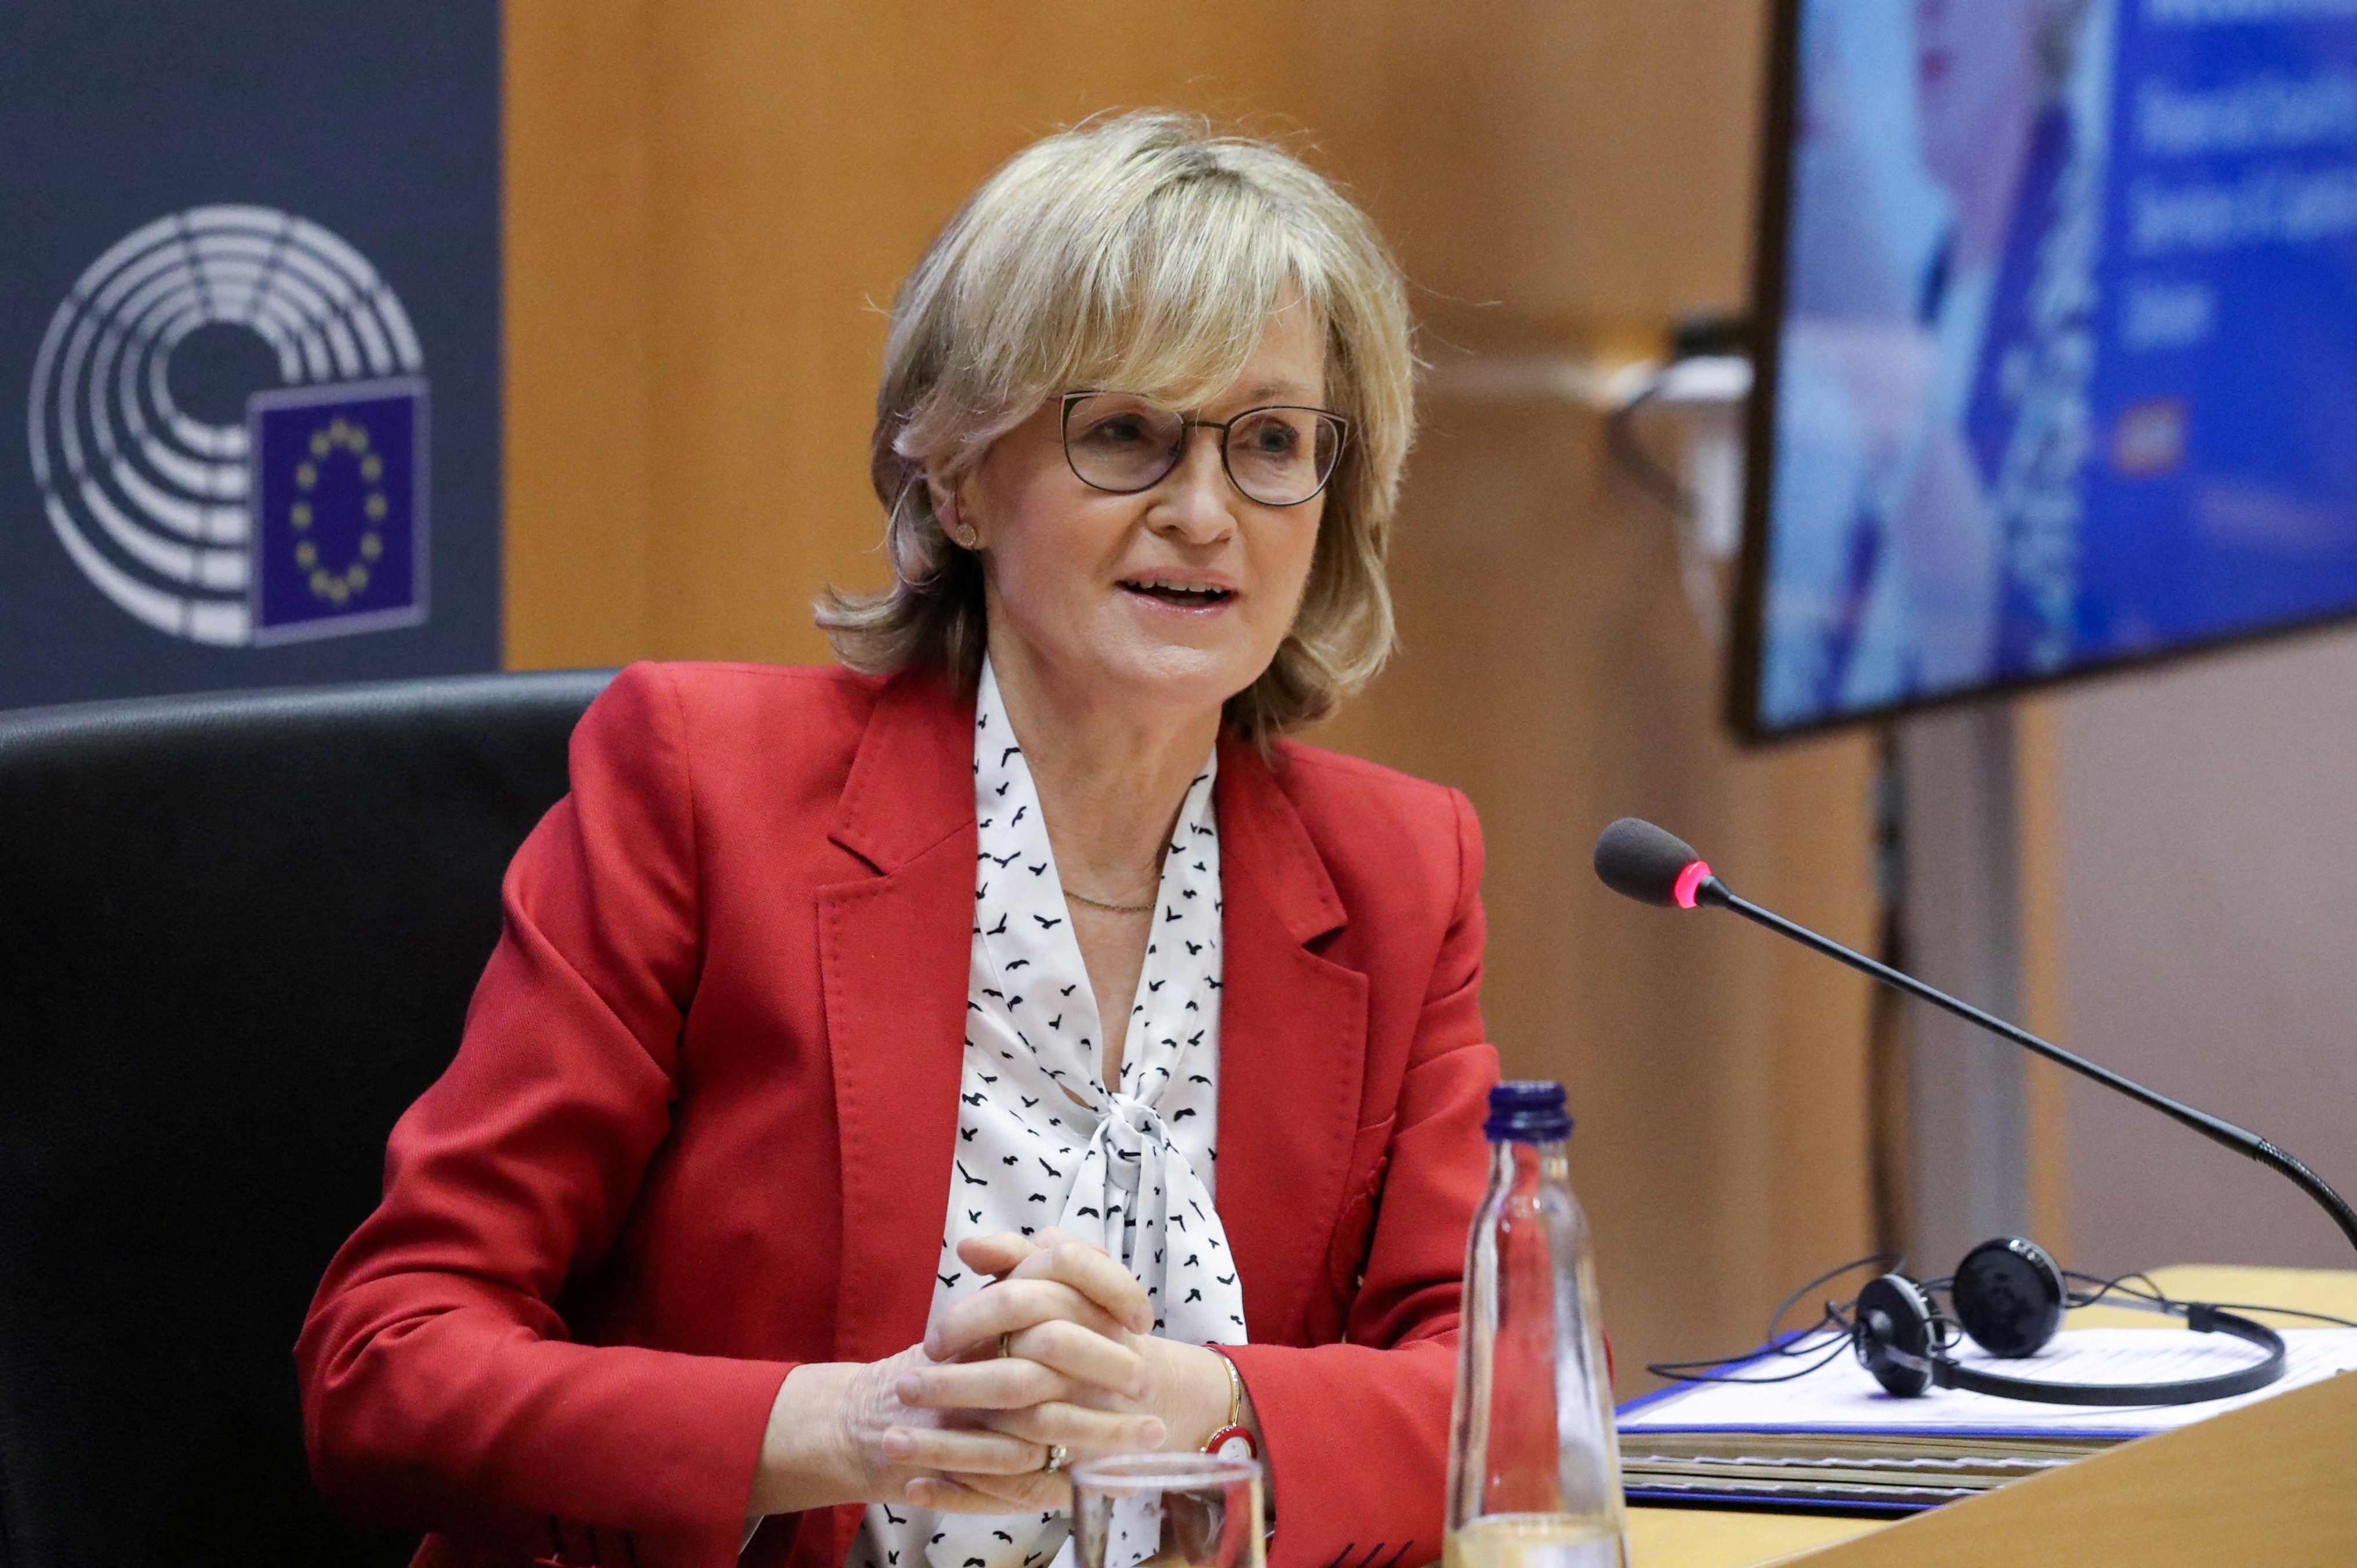 Mairead McGuinness attends her hearing as the new EU financial services commissioner, in Brussels